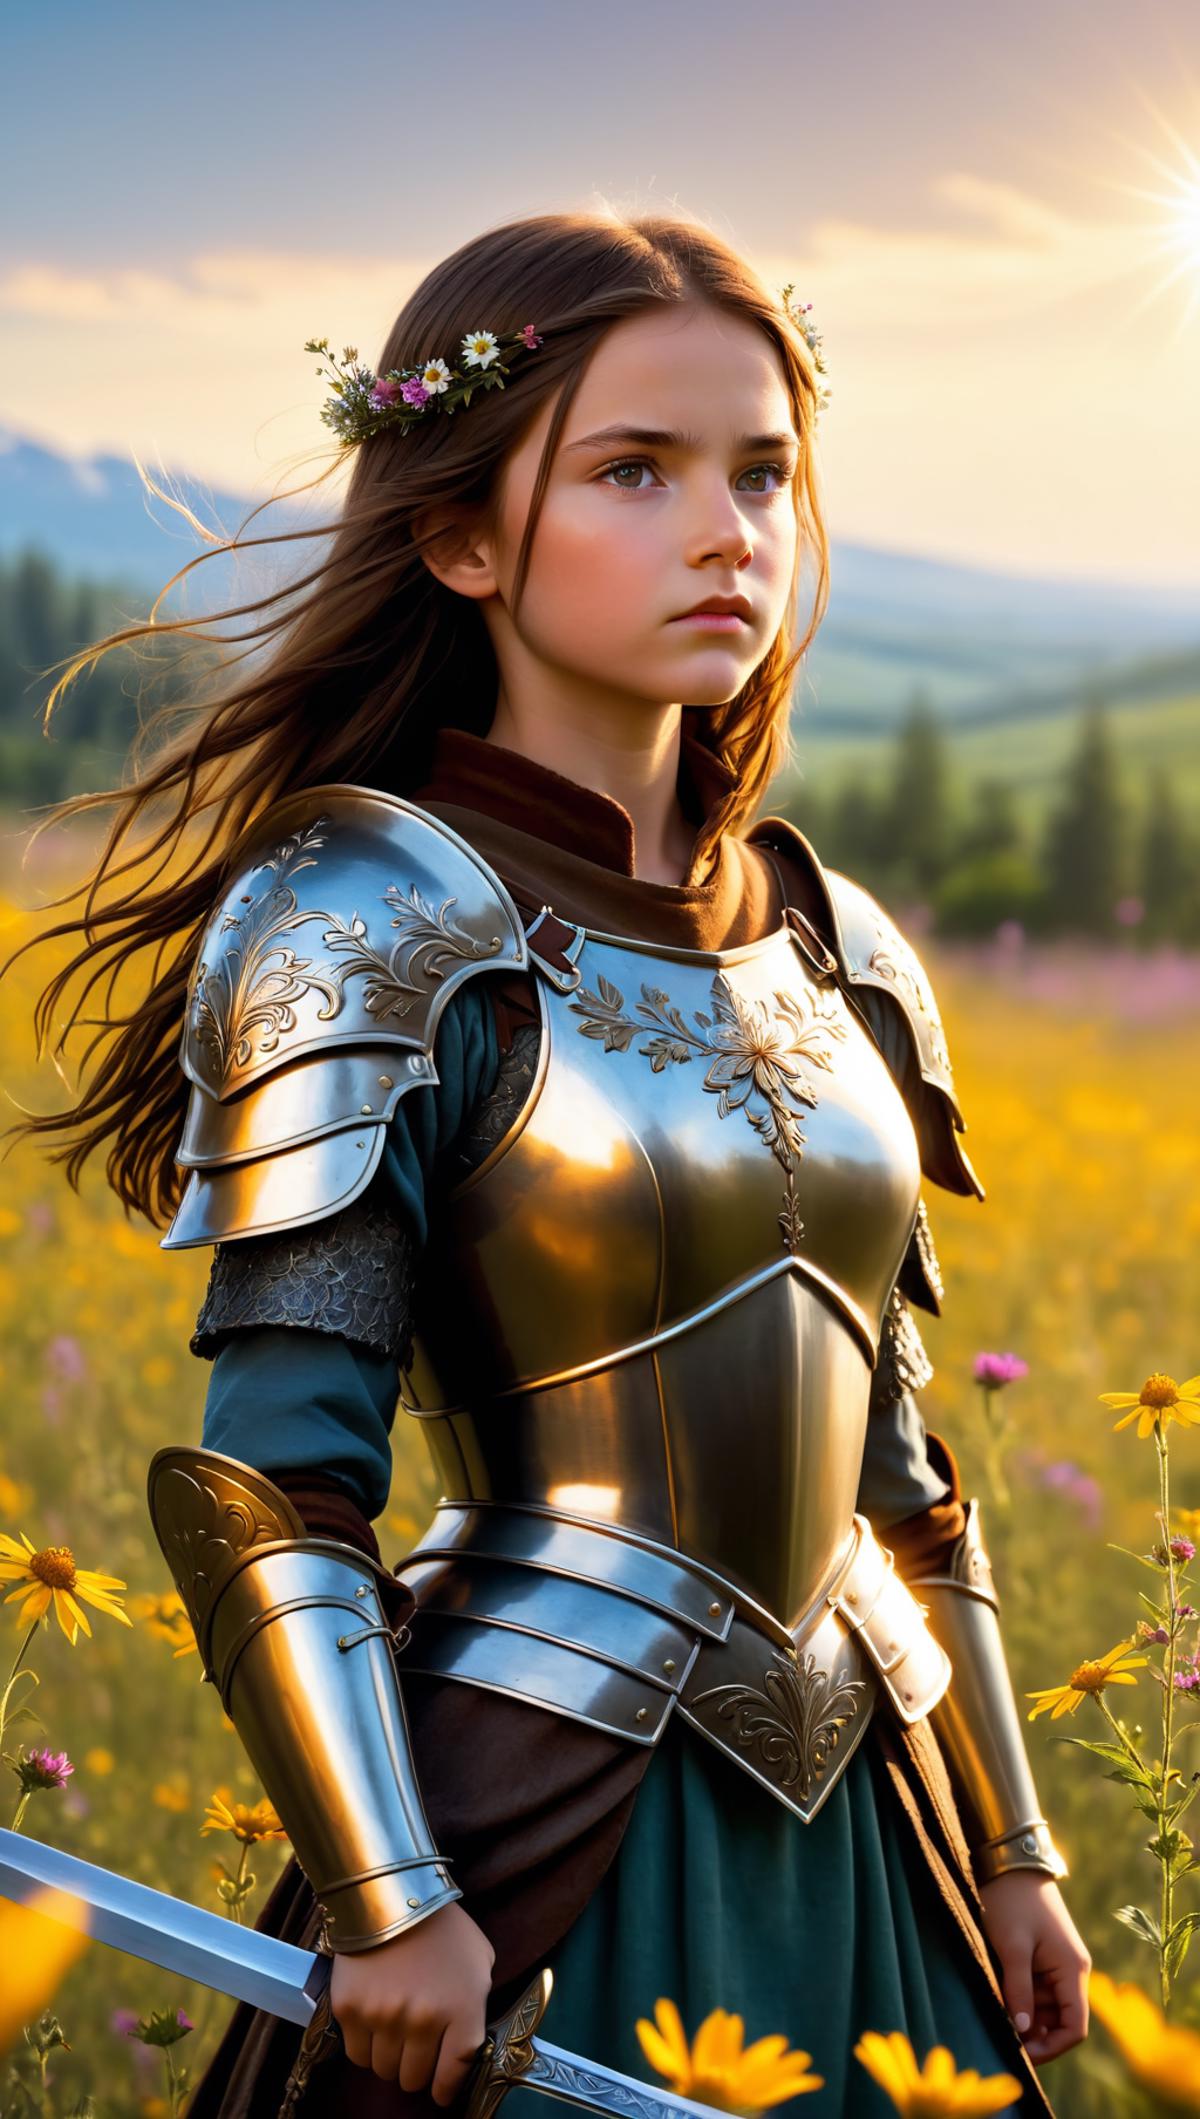 A young girl wearing a medieval suit of armor in a field of flowers.